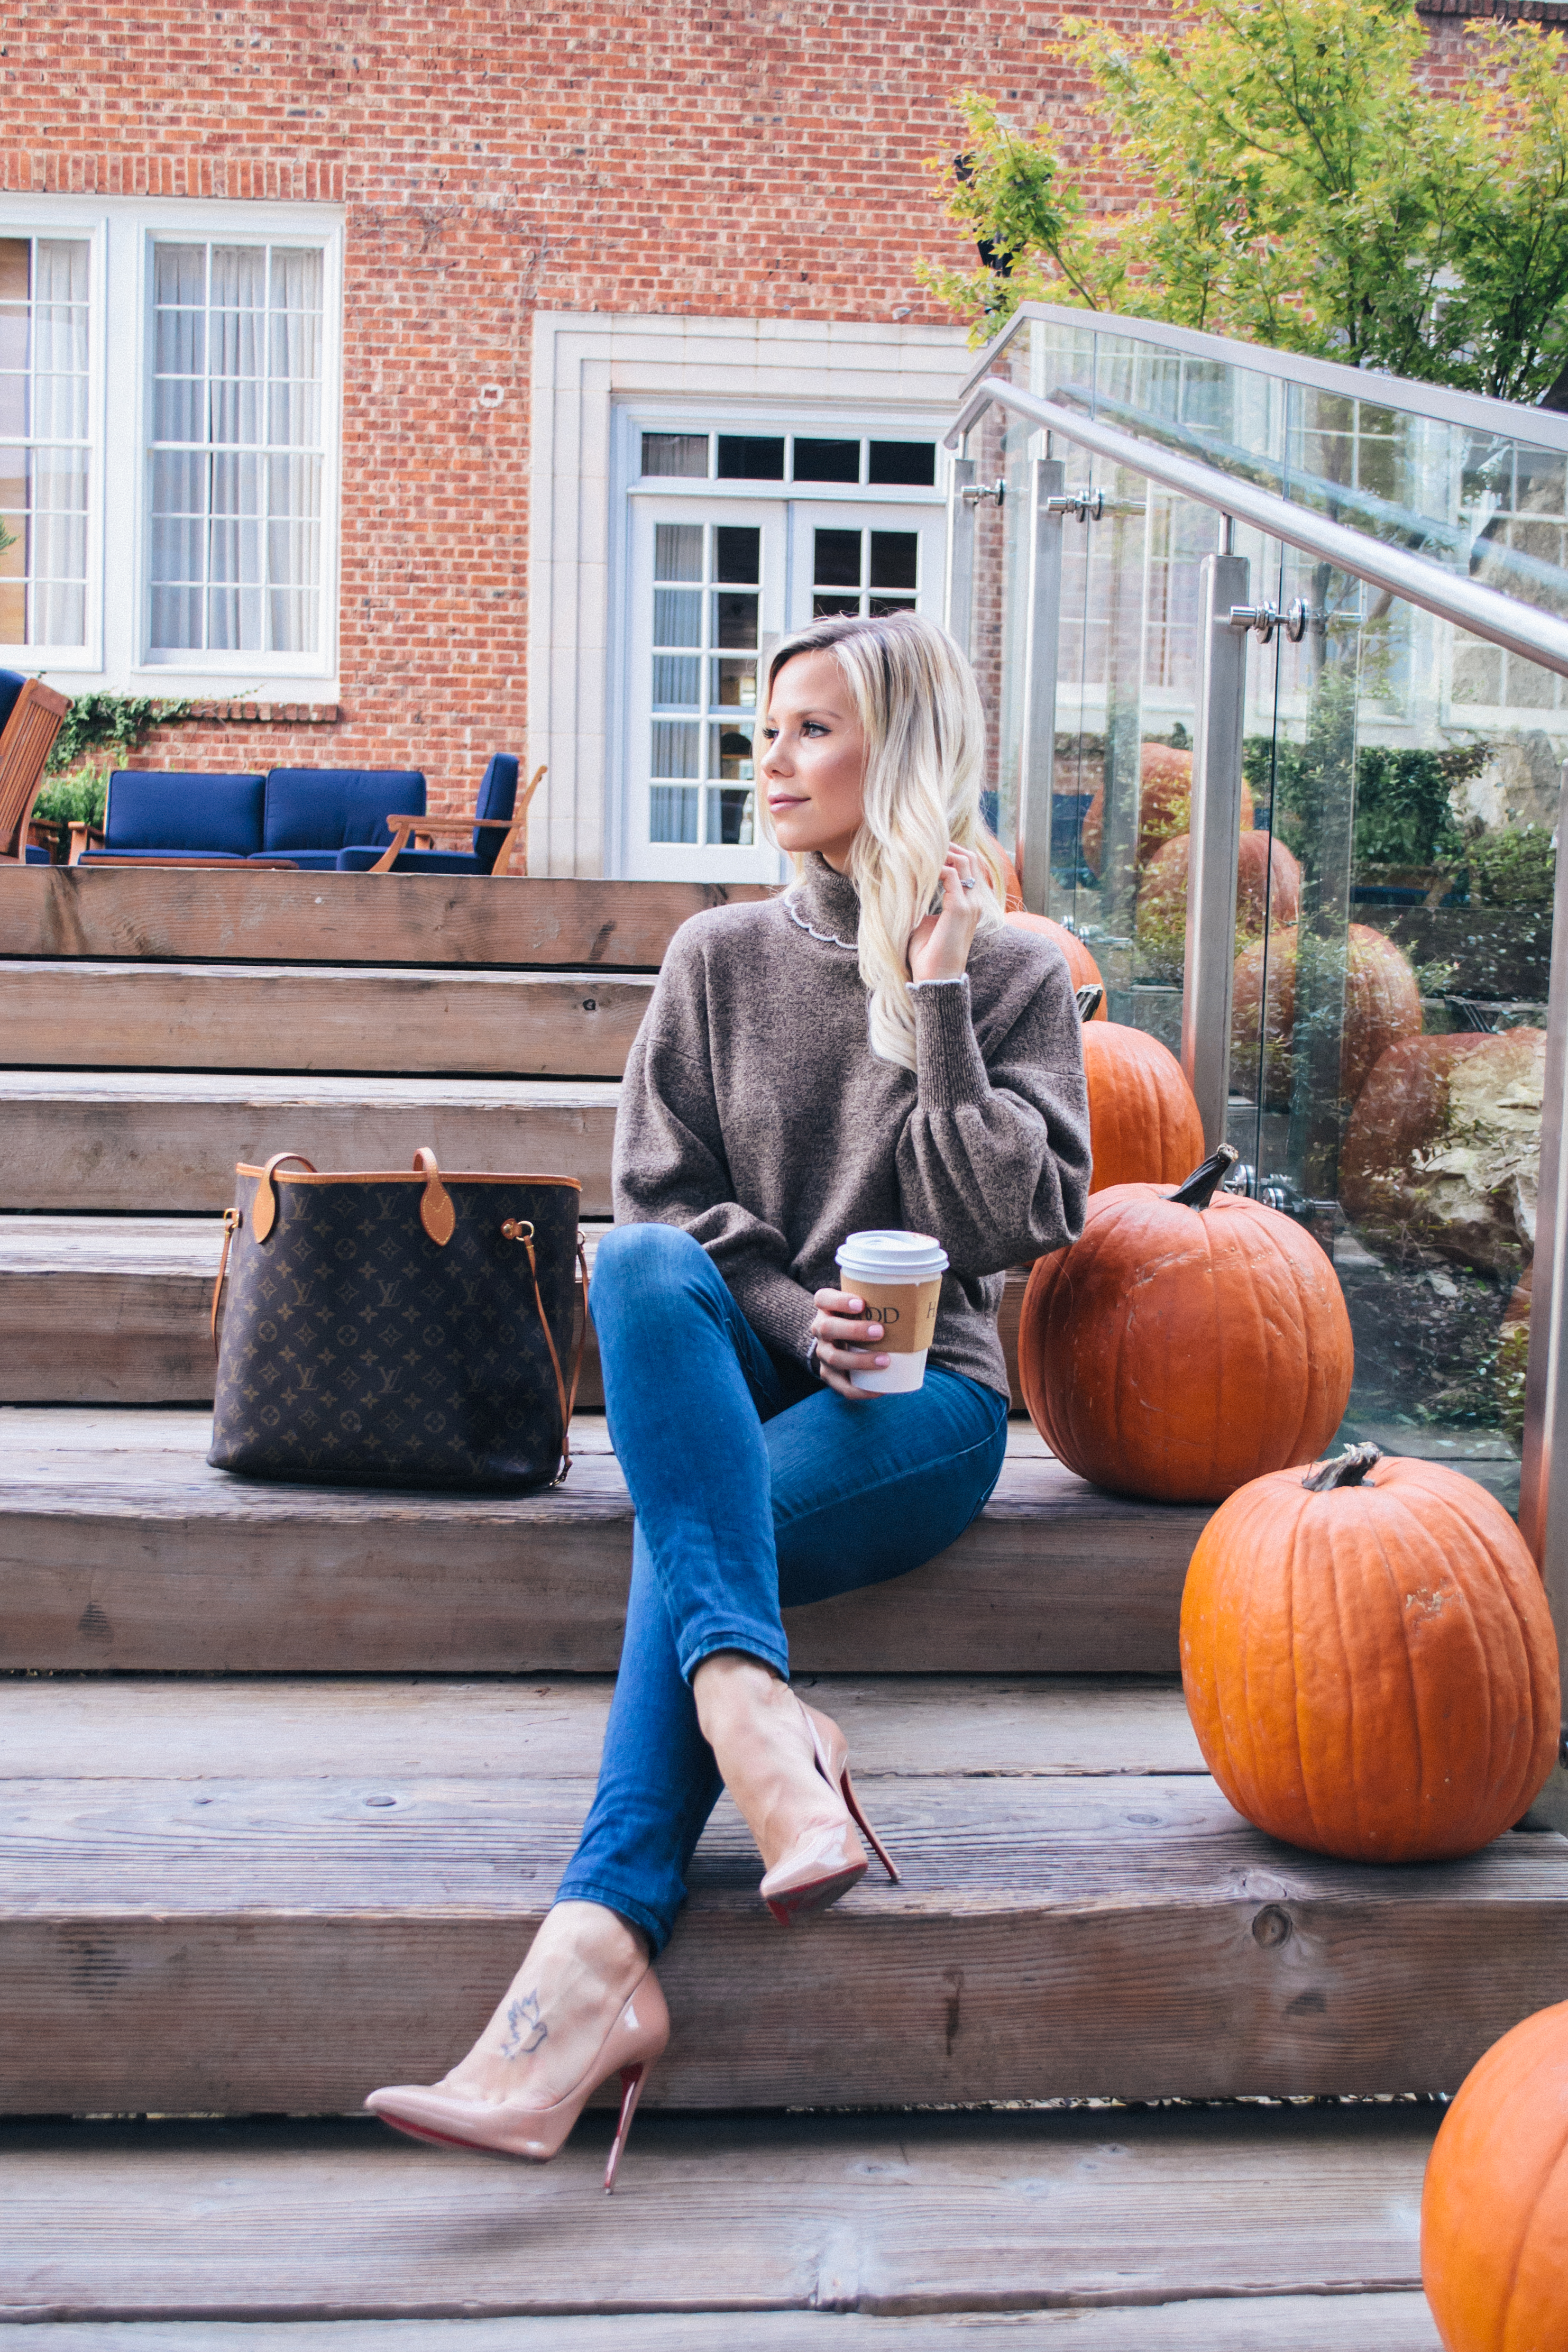 The perfect outfit for the pumpkin patch #fall #pumpkin #falloutfit #fallstyle